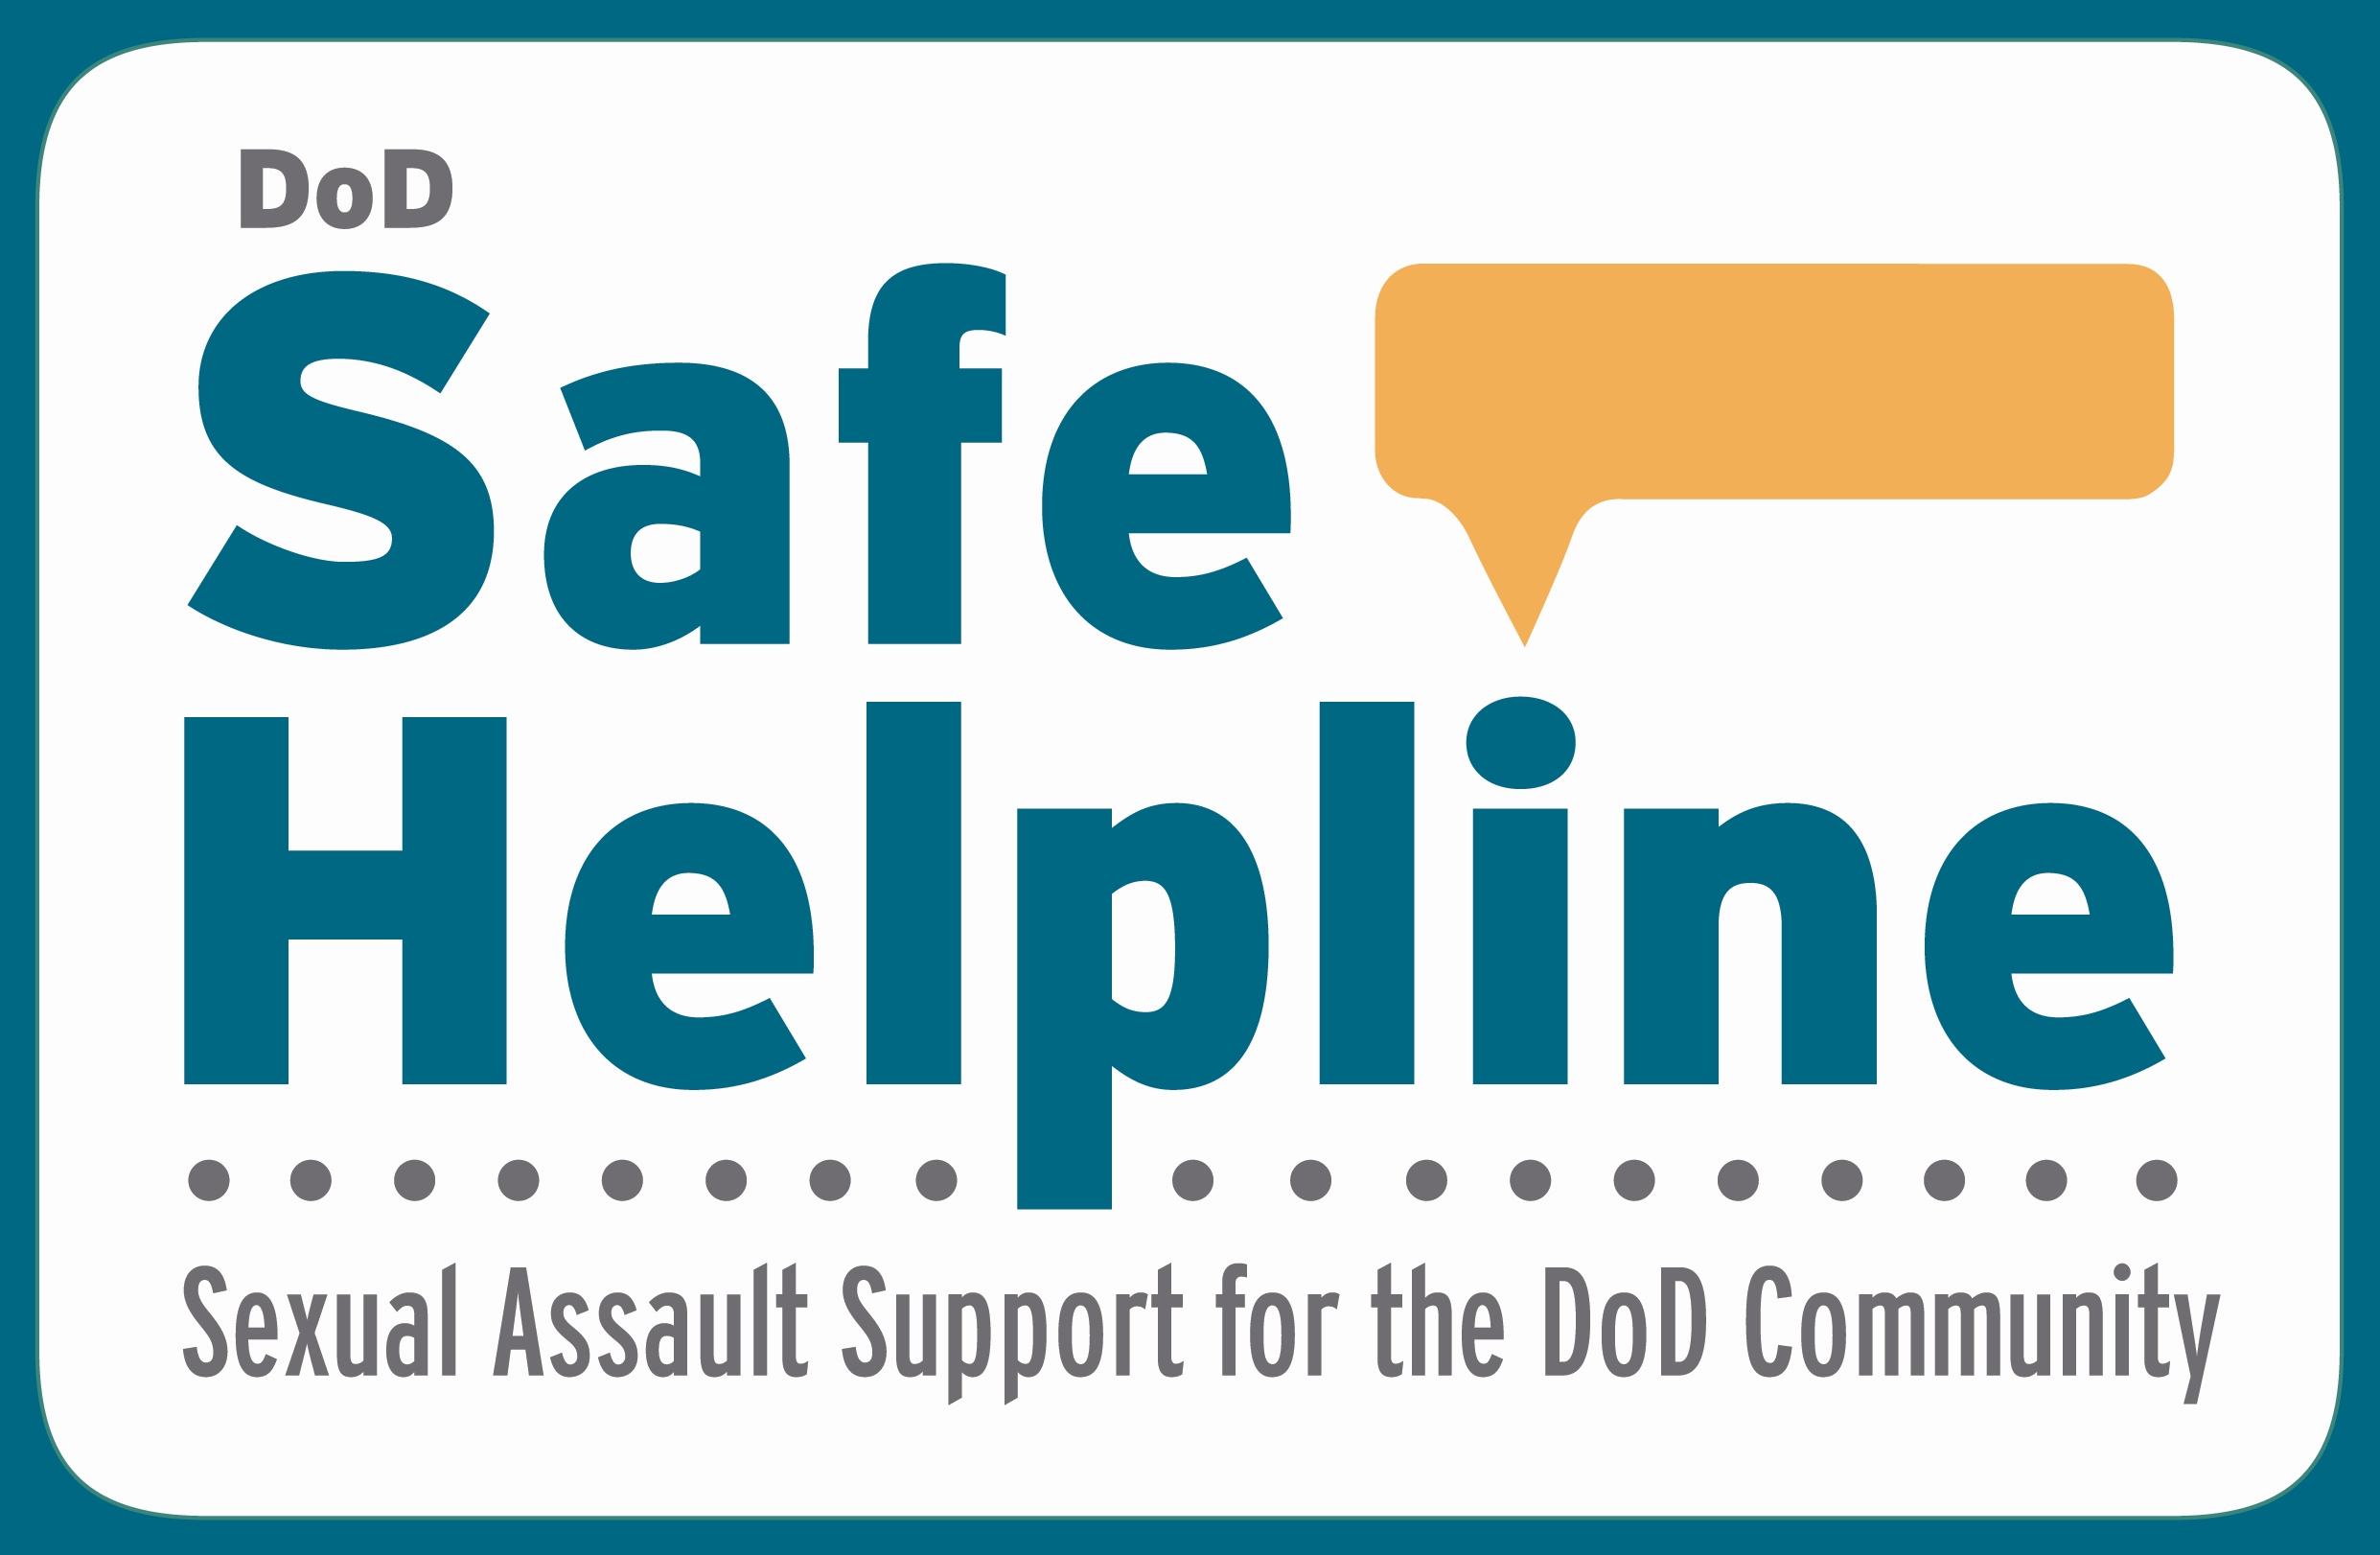 Sexual Assault Support for the DoD Community